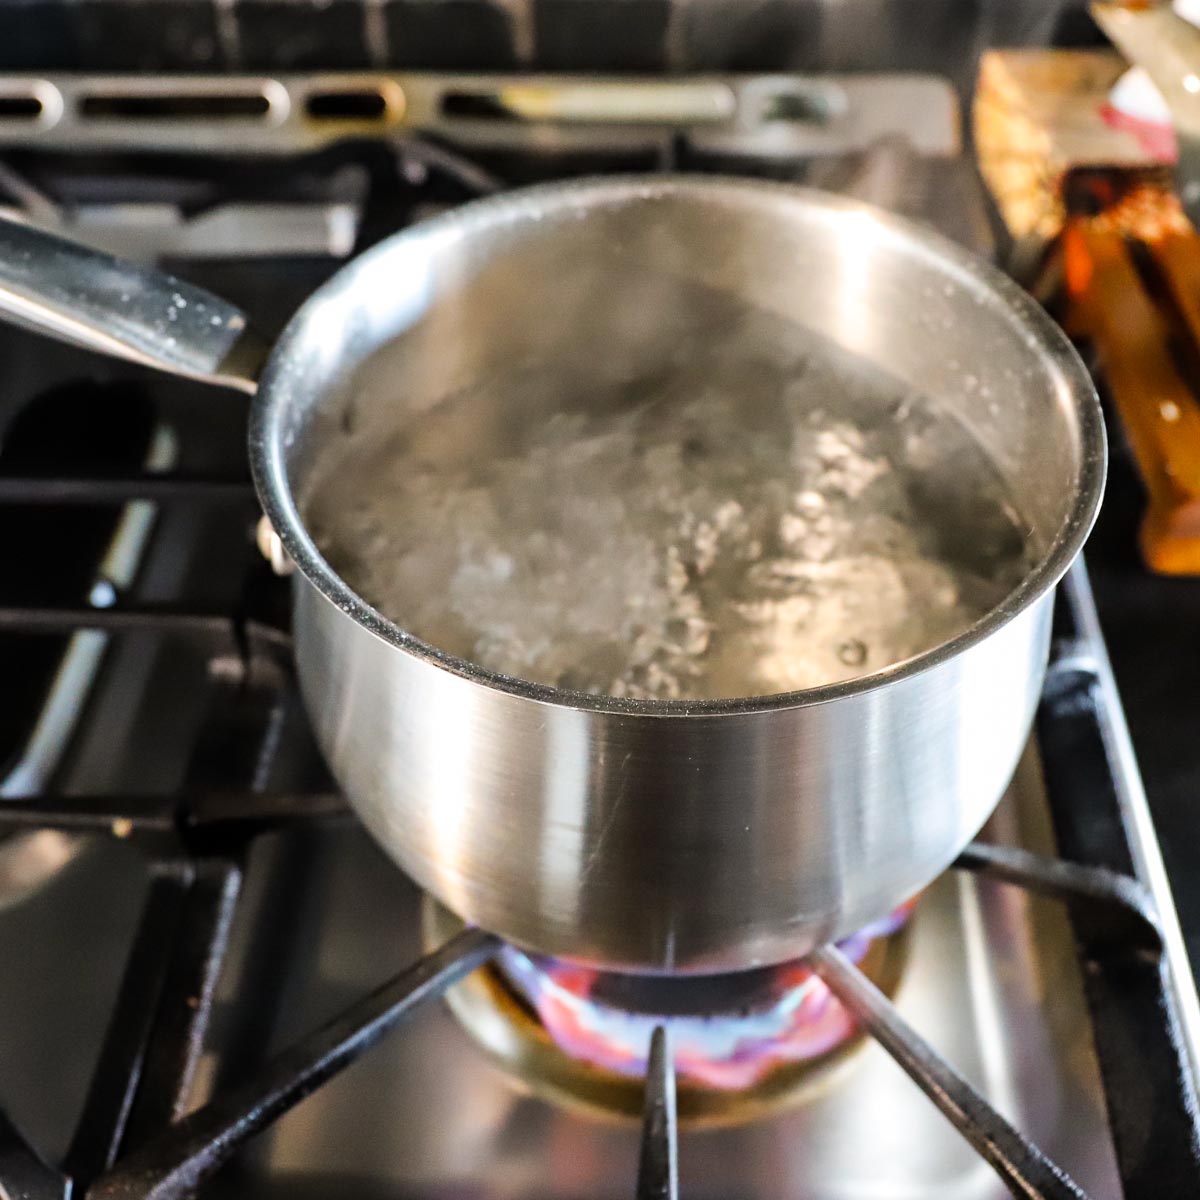 A pot of water boiling over the flame on a gas stove.